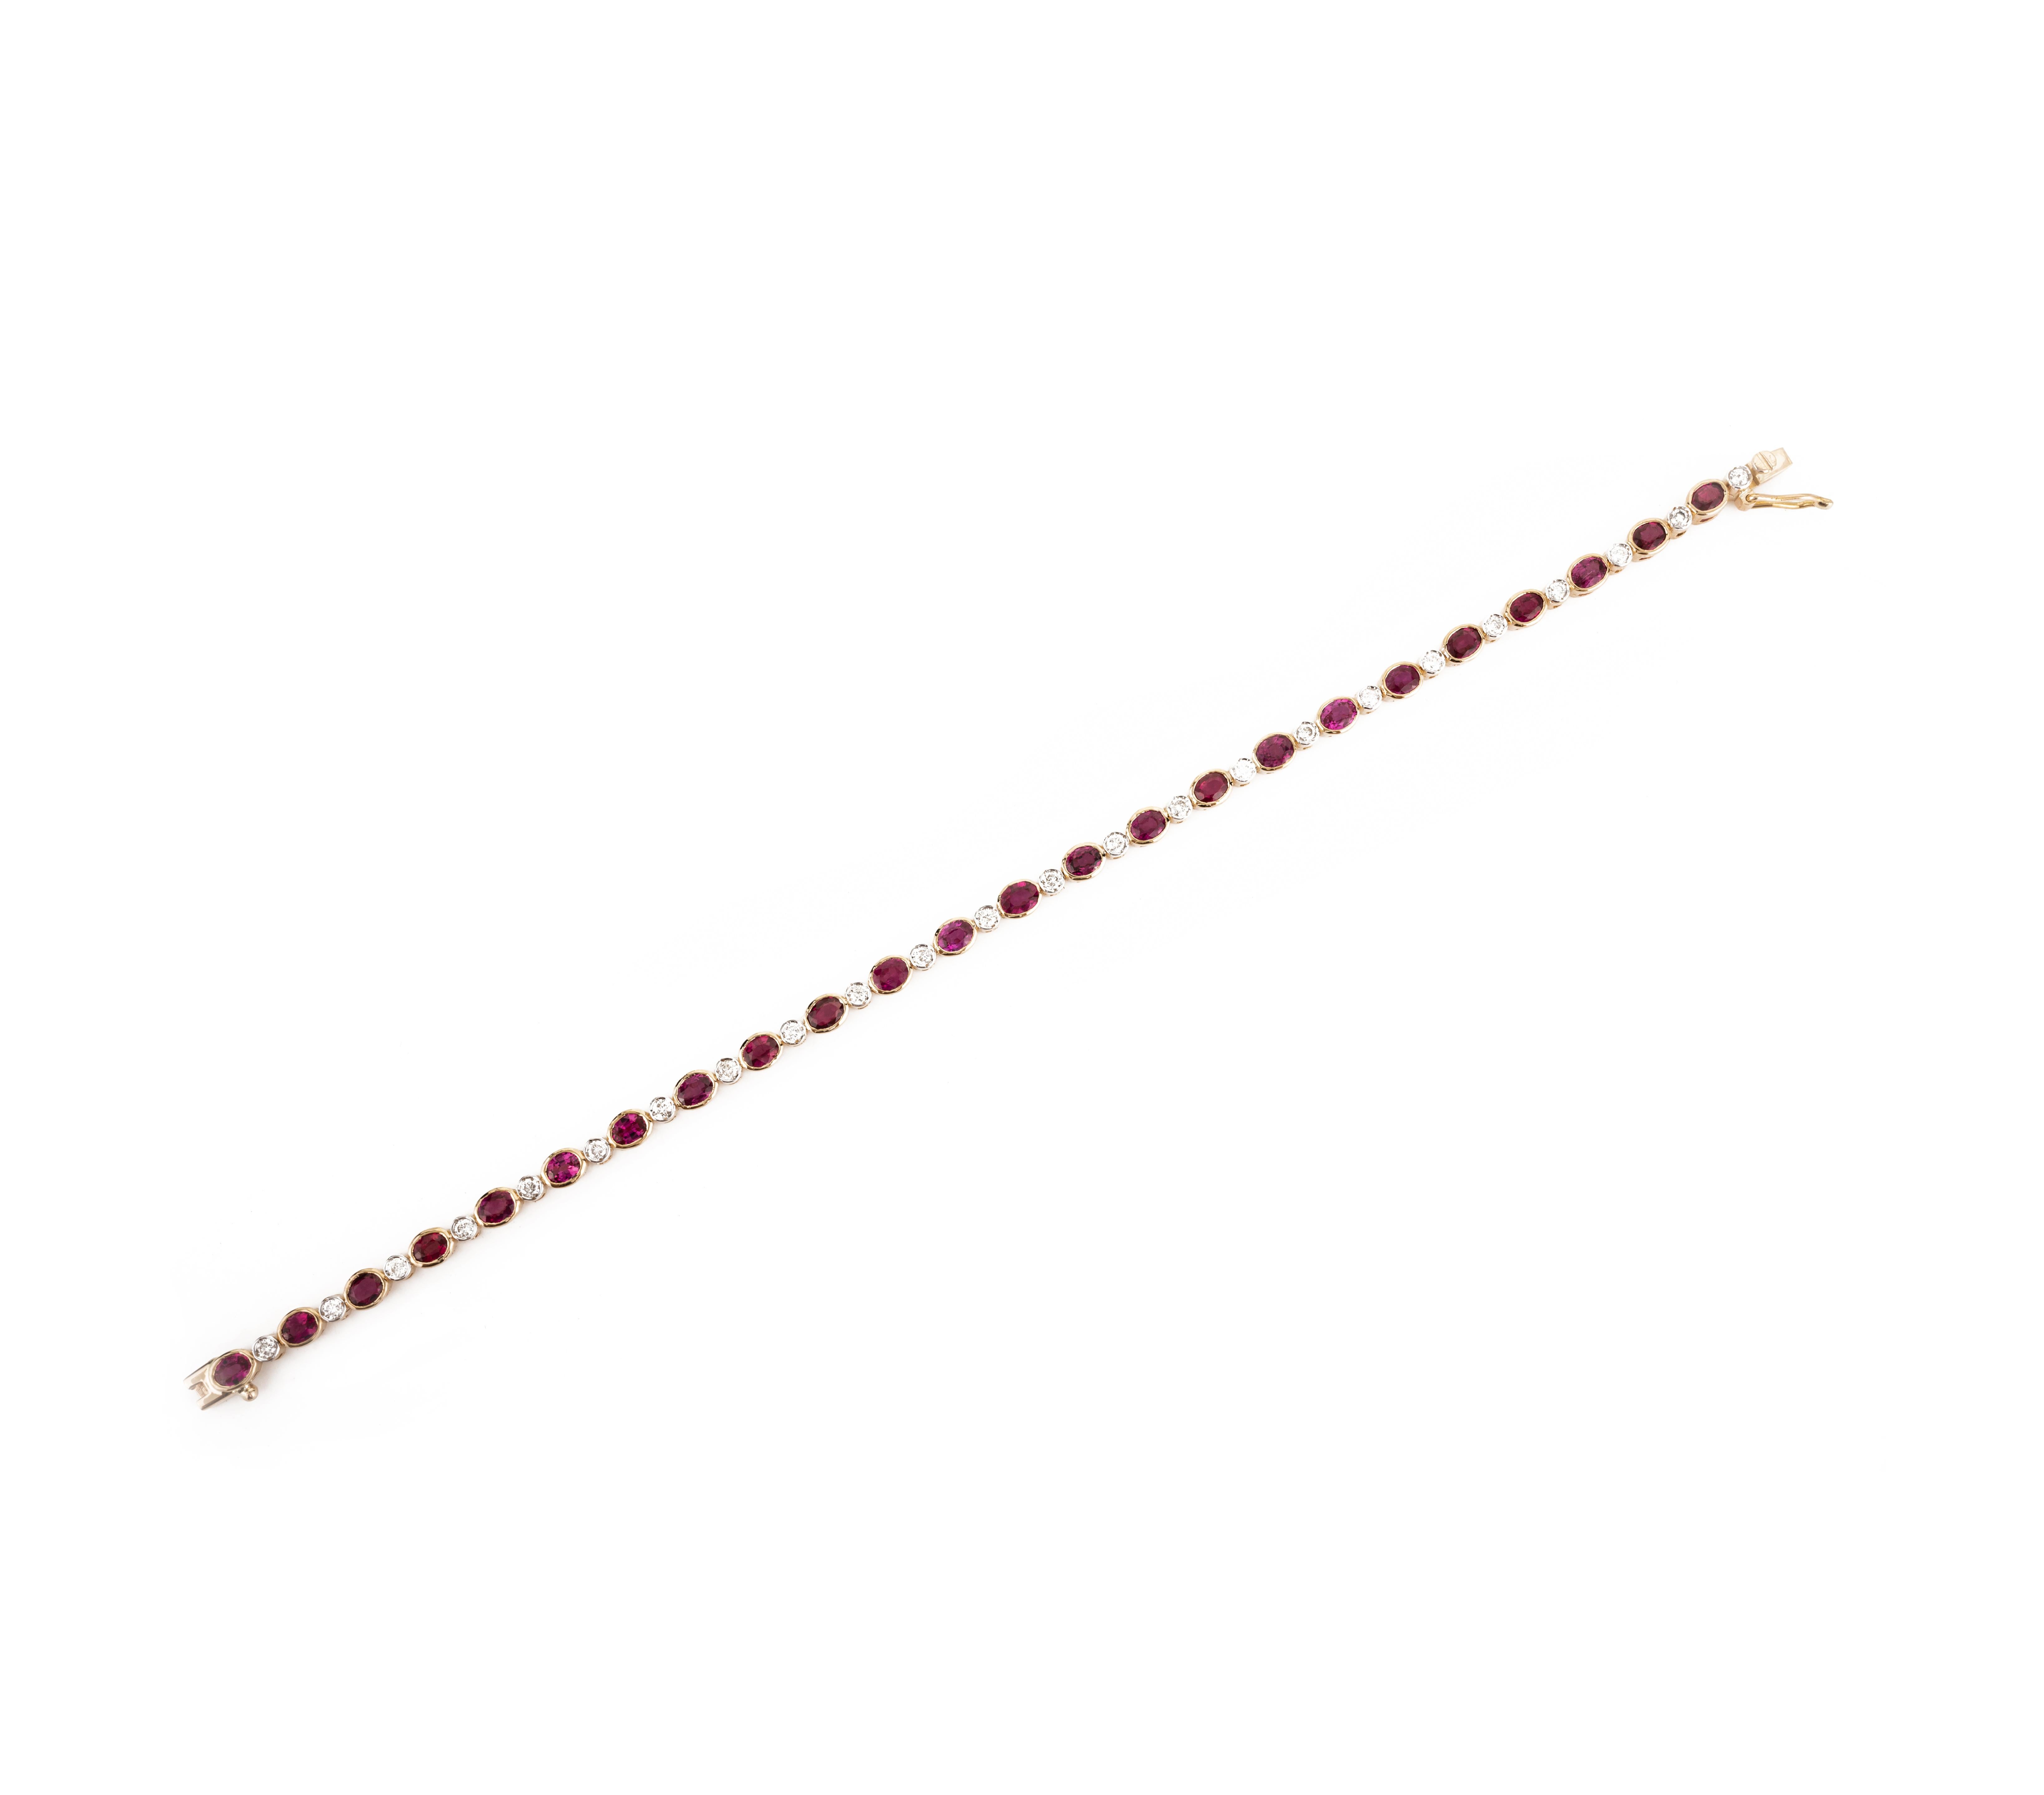 Contemporary 4.9 Carat Faceted Ruby Diamond Tennis Bracelet in 18k Solid Yellow Gold For Sale